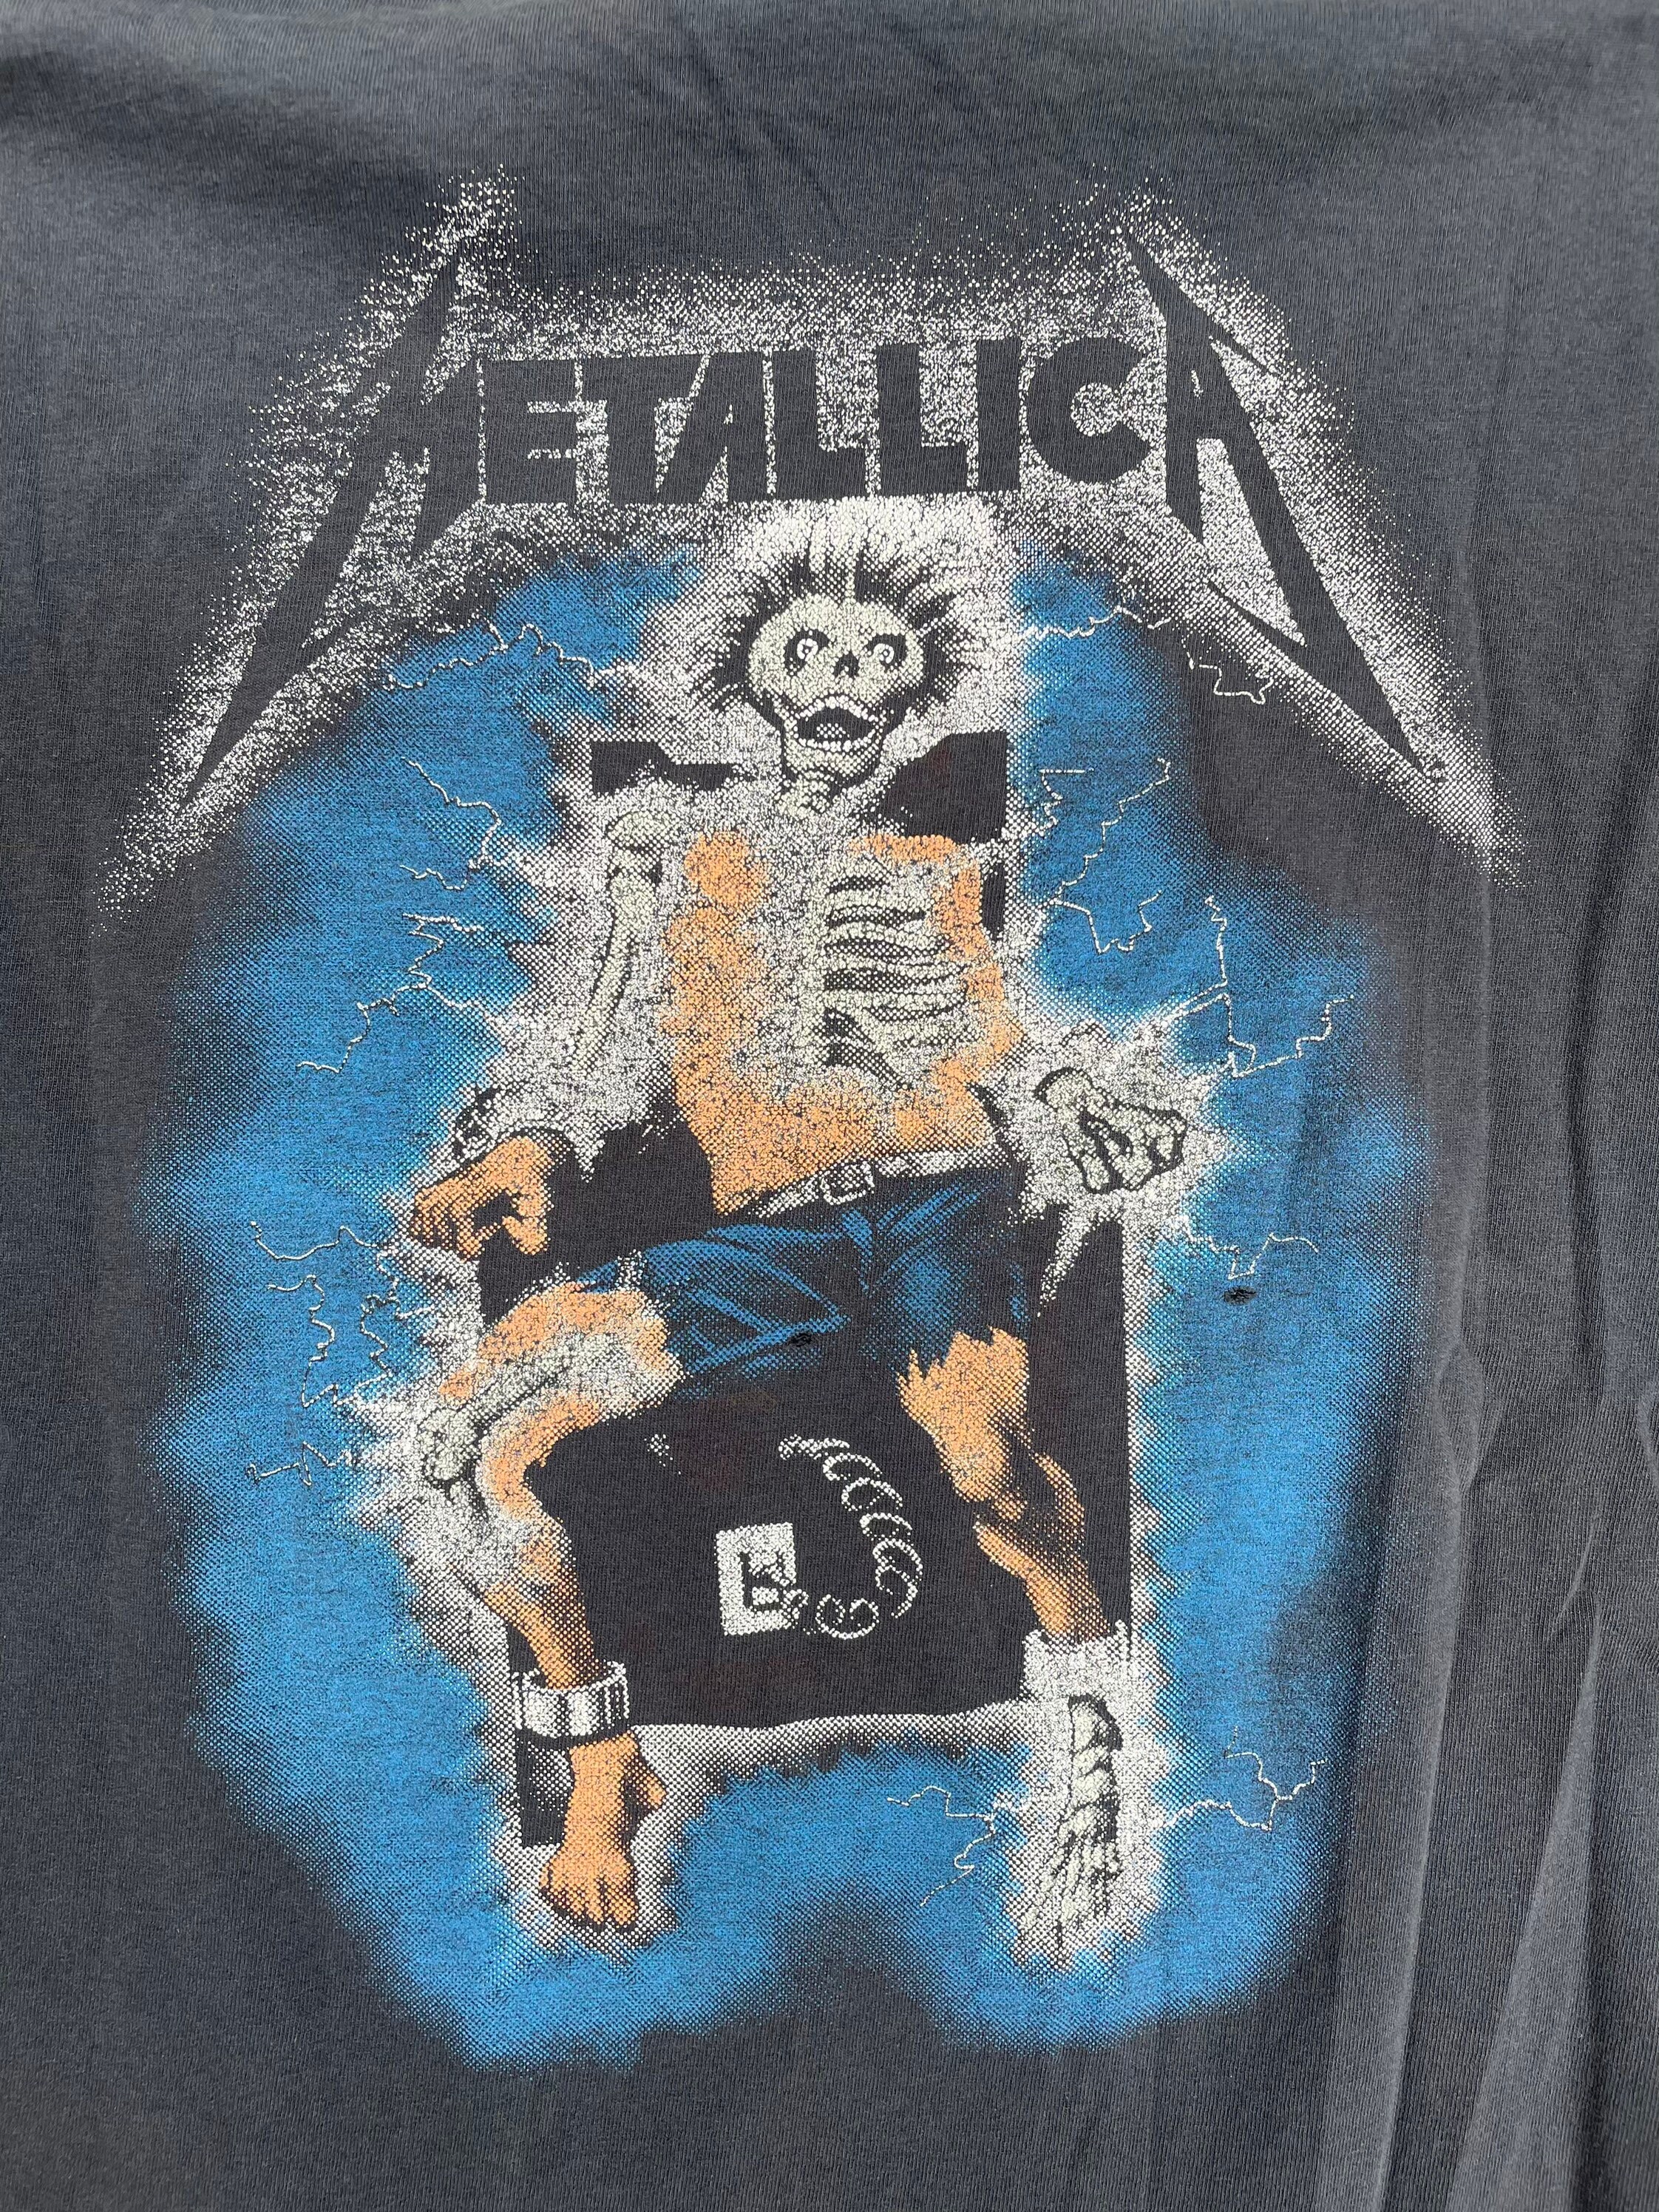 80s Metallica Kill Em All Metal Electric Chair t-shirt Large - The Captains  Vintage